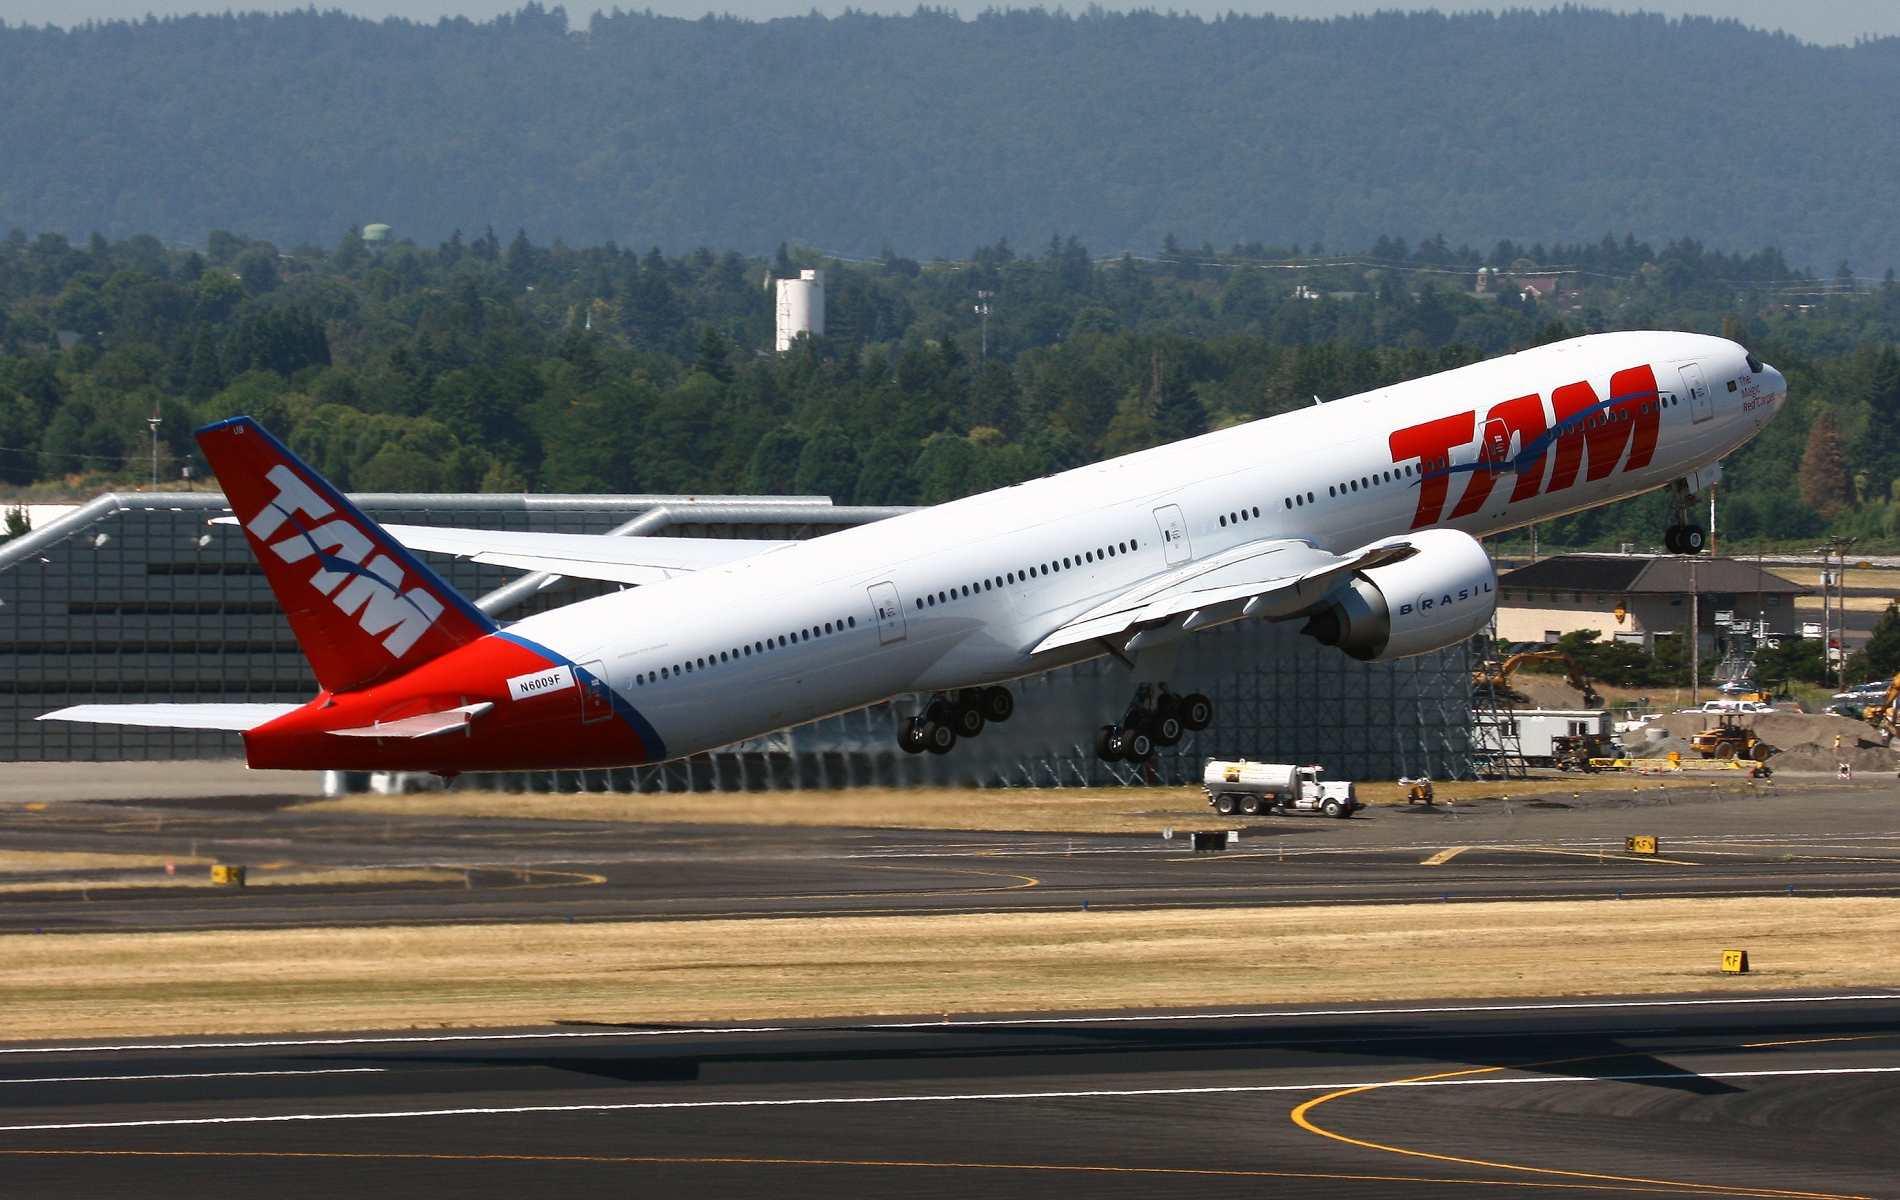 Vehicles Boeing 777 HD Wallpaper | Background Image